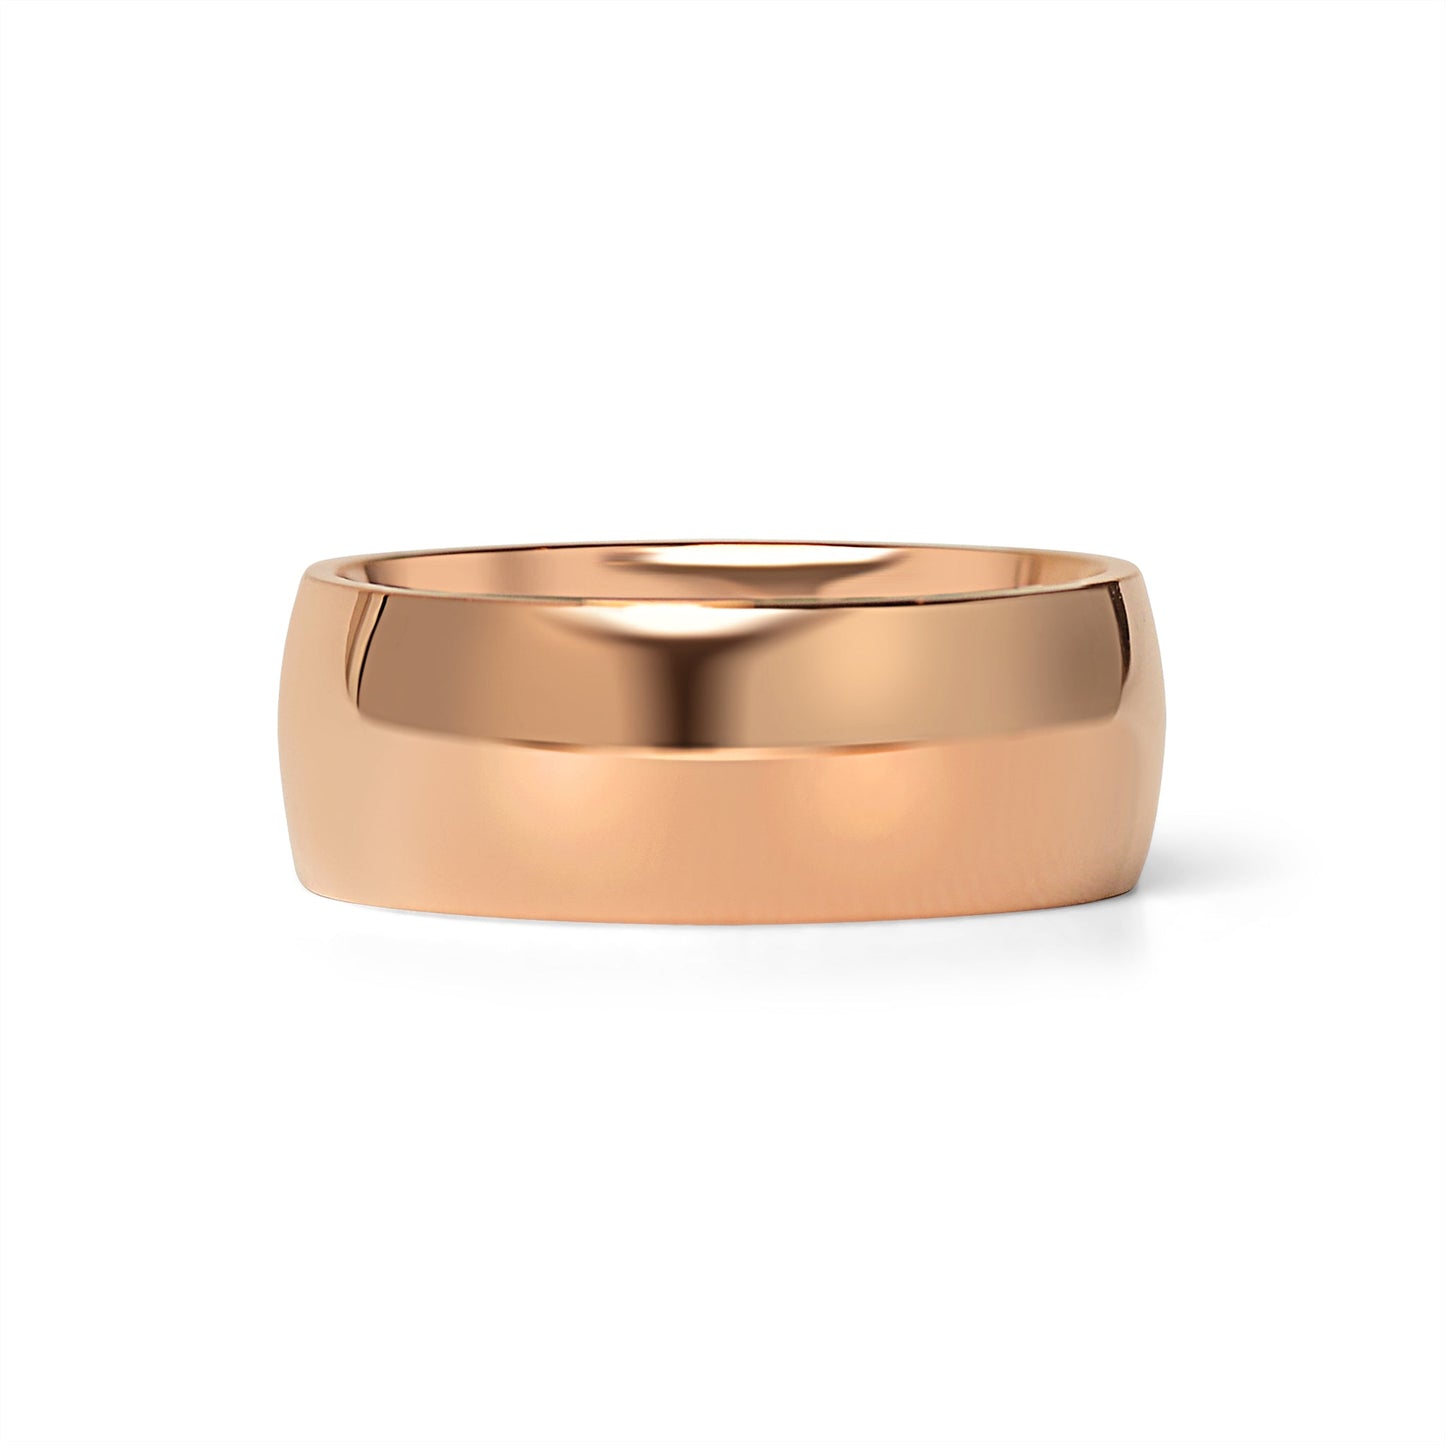 Simple Rose Gold Rounded Stainless Steel Ring